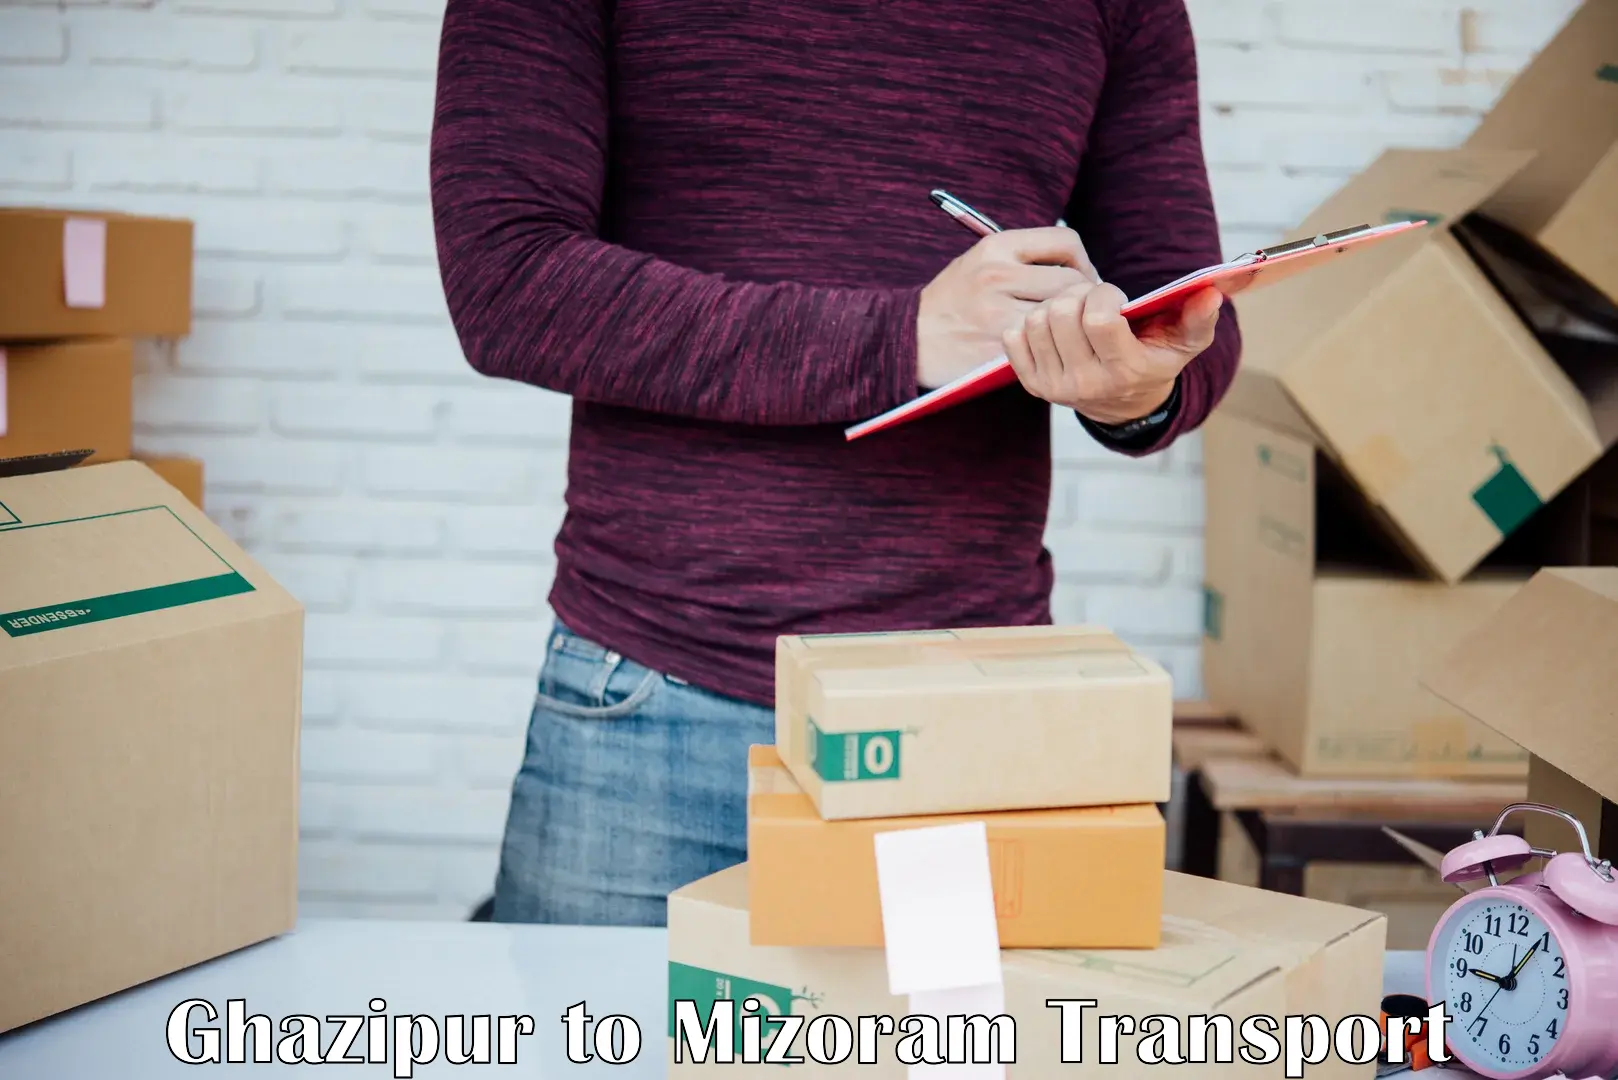 Delivery service Ghazipur to Mizoram